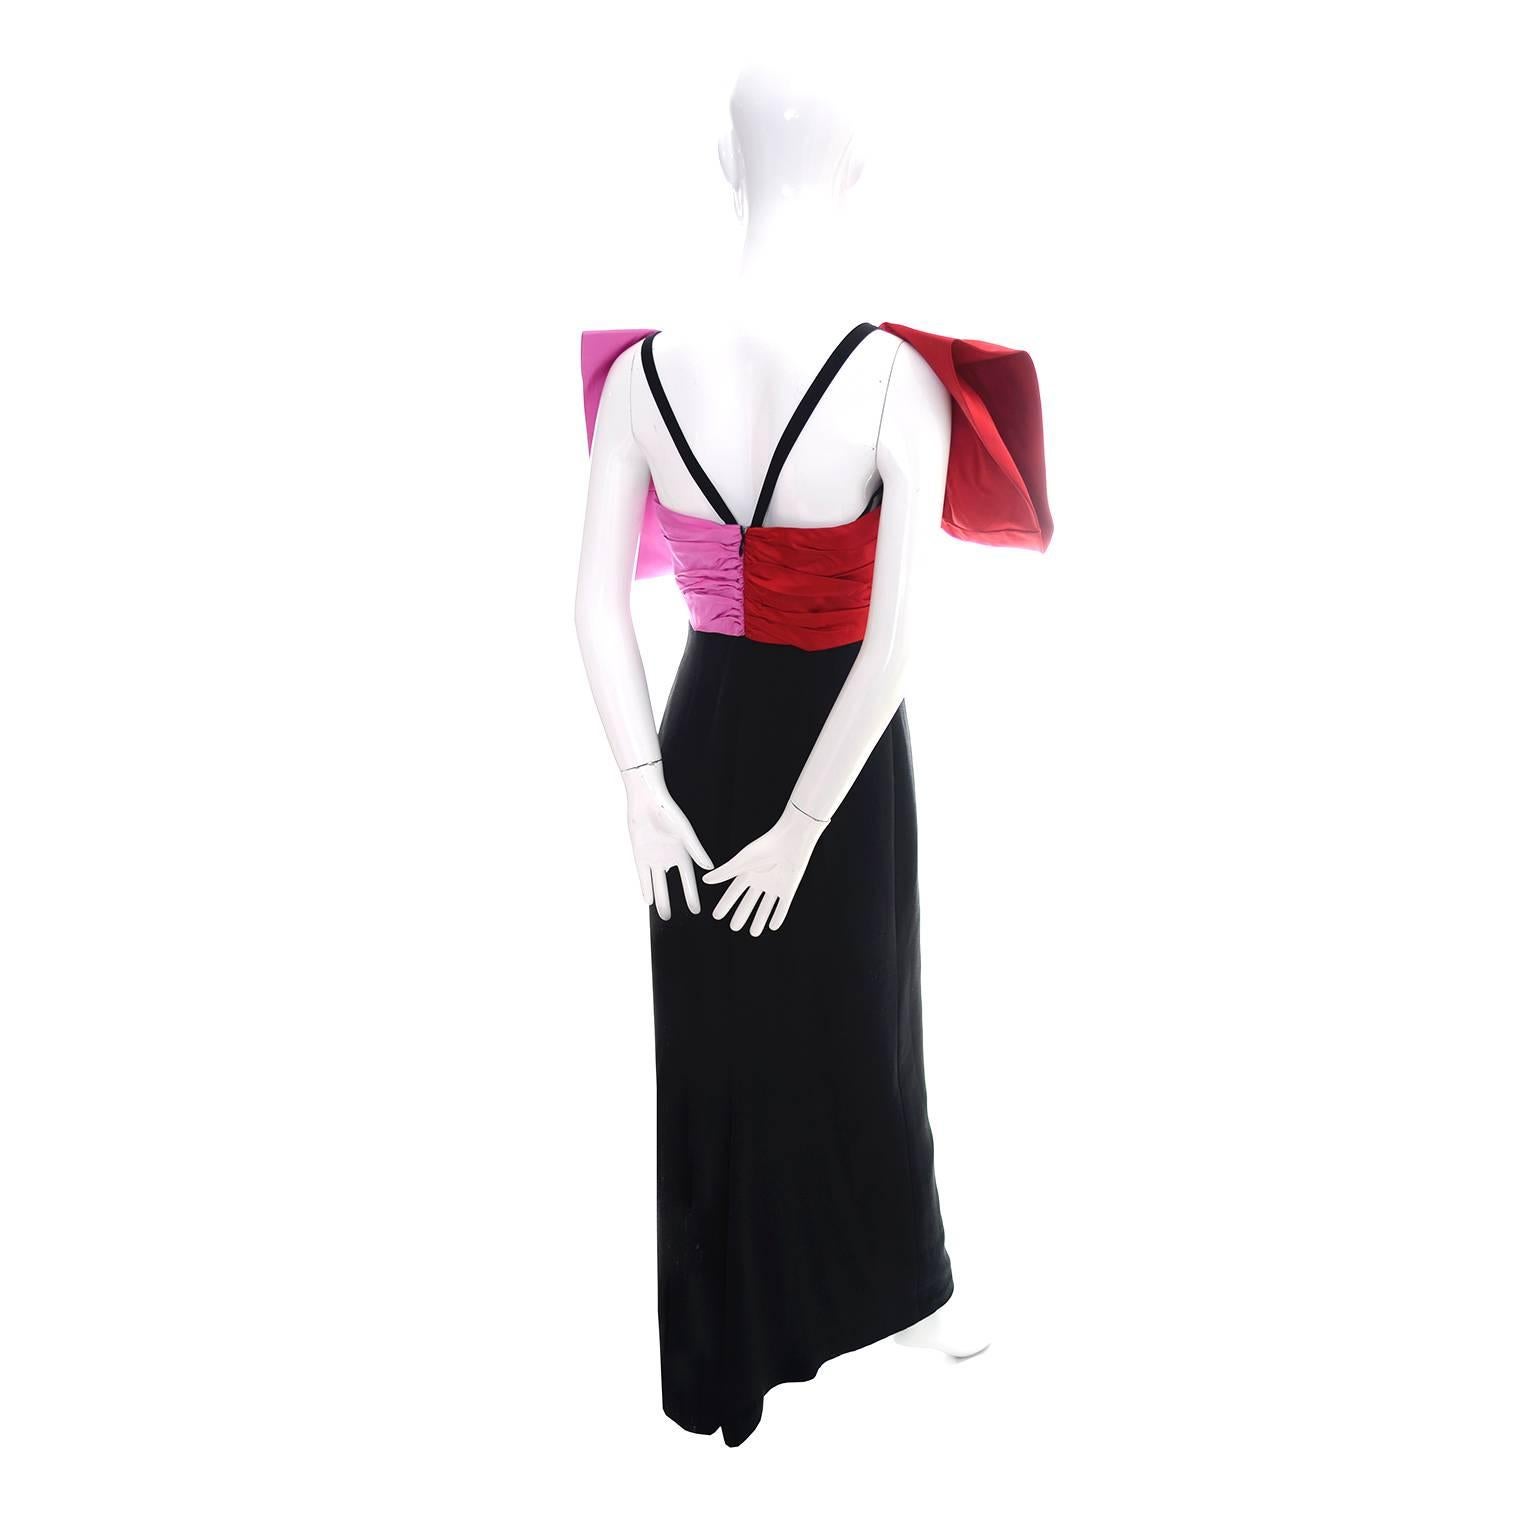 This is an outstanding vintage dress from Bill Blass that definitely makes a statement with its beautiful pink and red oversized bow.  The slim fitted black crepe dress is figure flattering and closes with a back zipper.  The built in corset with